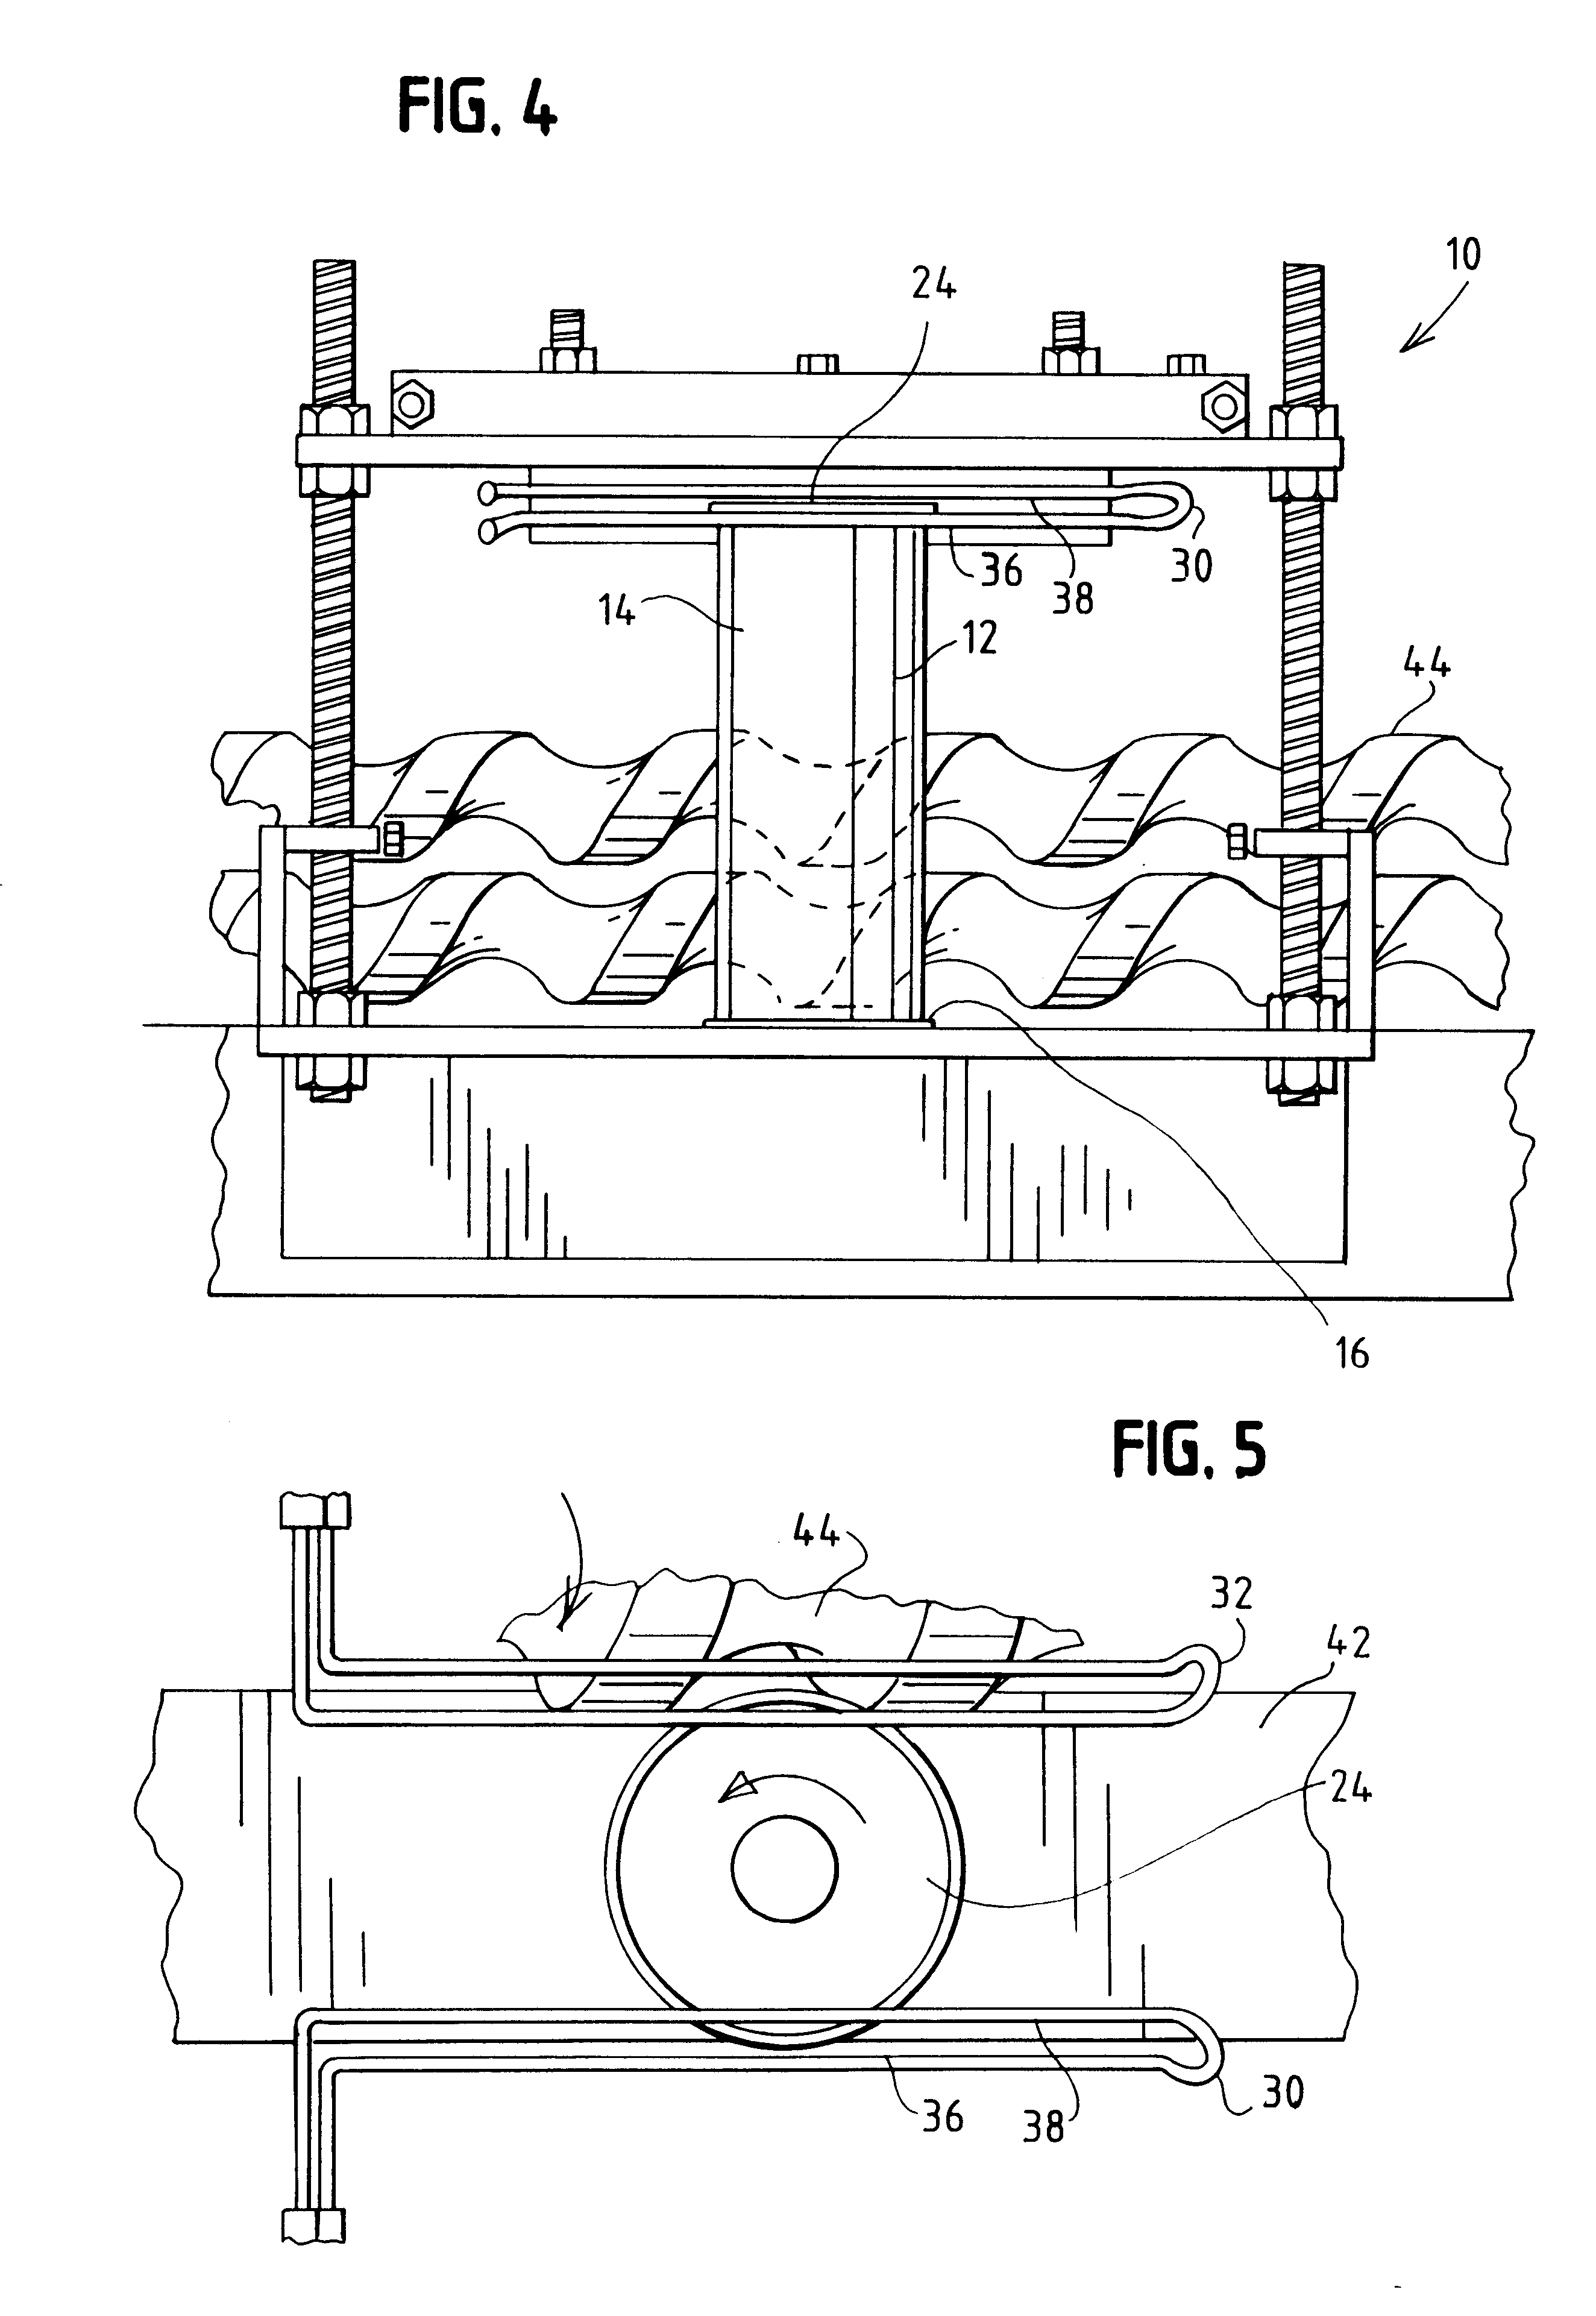 Method for induction sealing a plastic part to a composite container